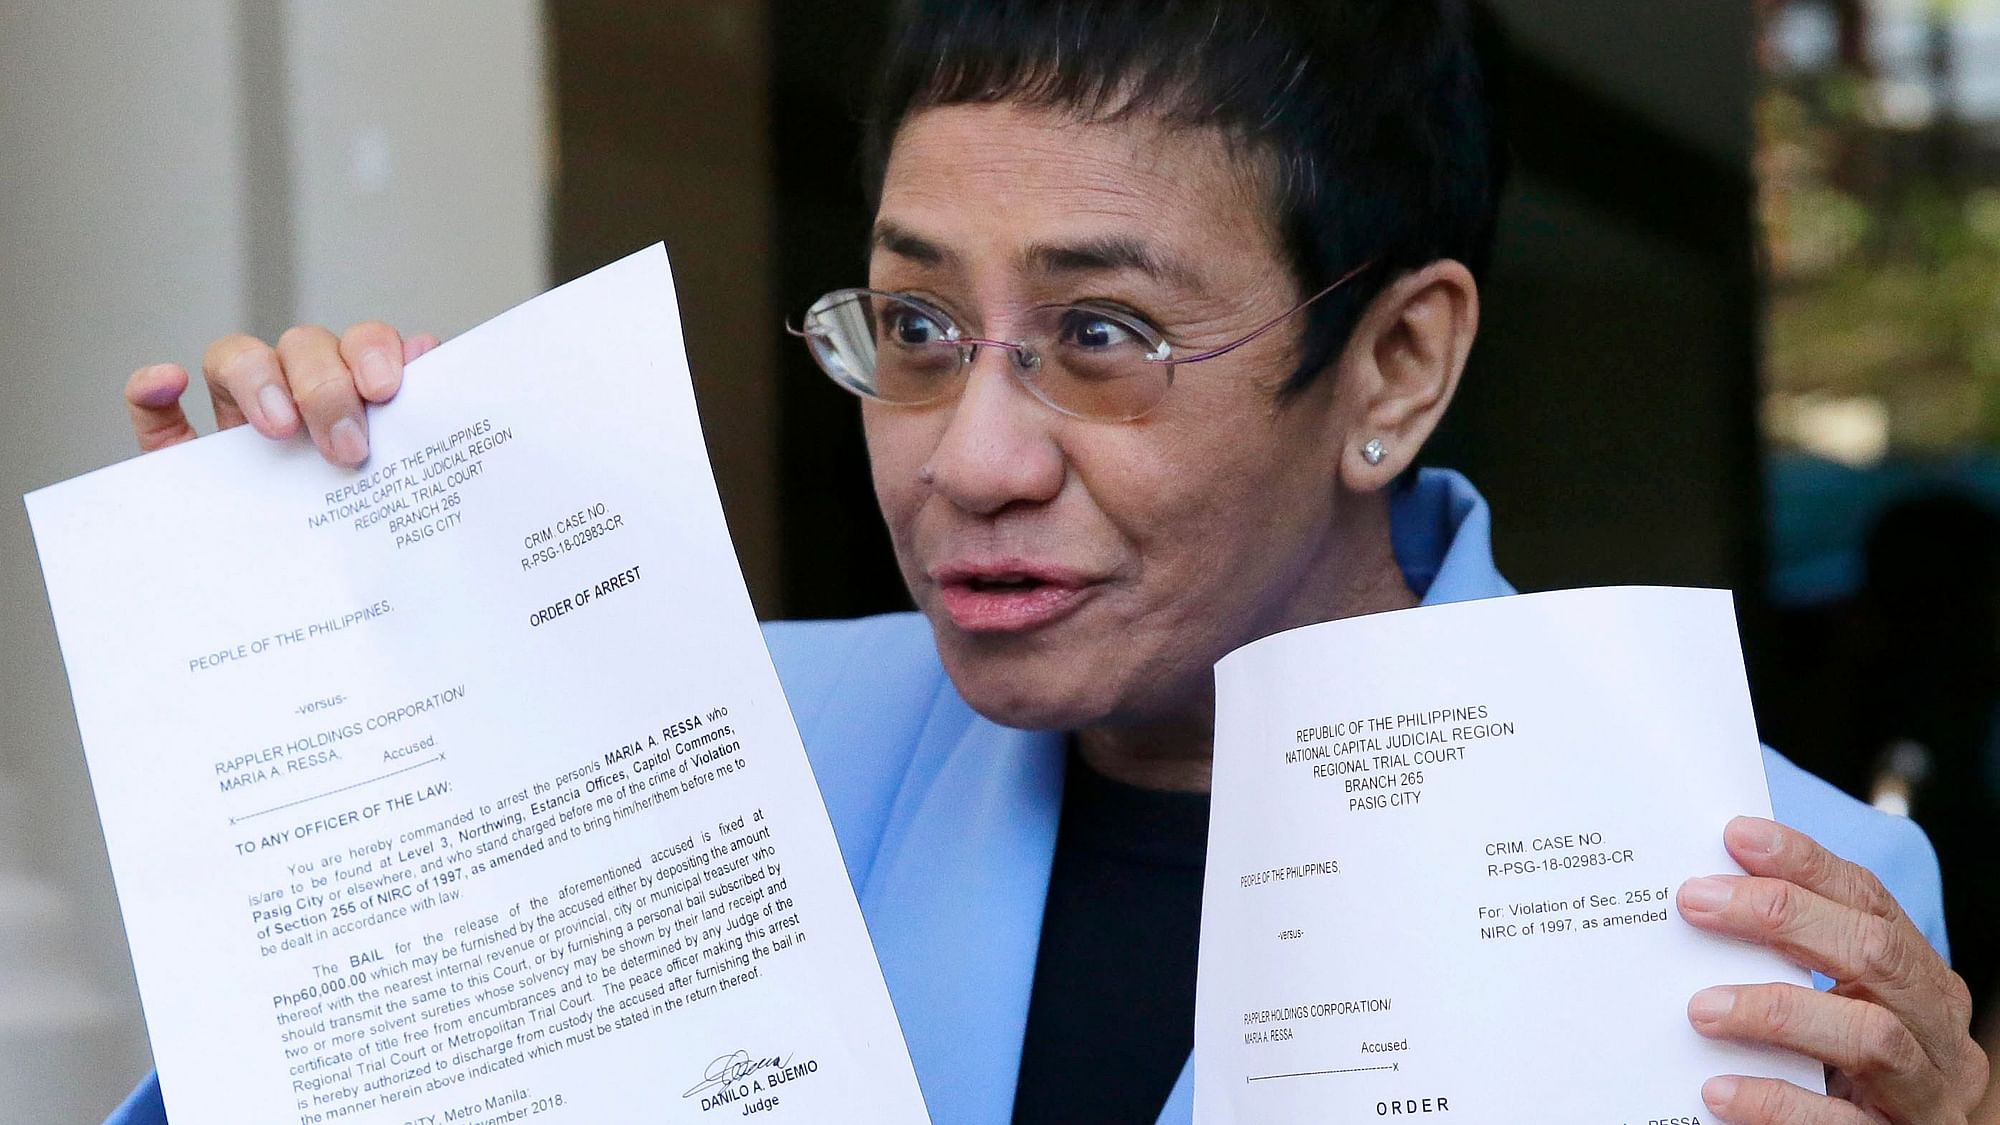 An arrest warrant against Rappler CEO and editor, Maria Ressa was issued on 28 November detailing five counts of tax fraud.